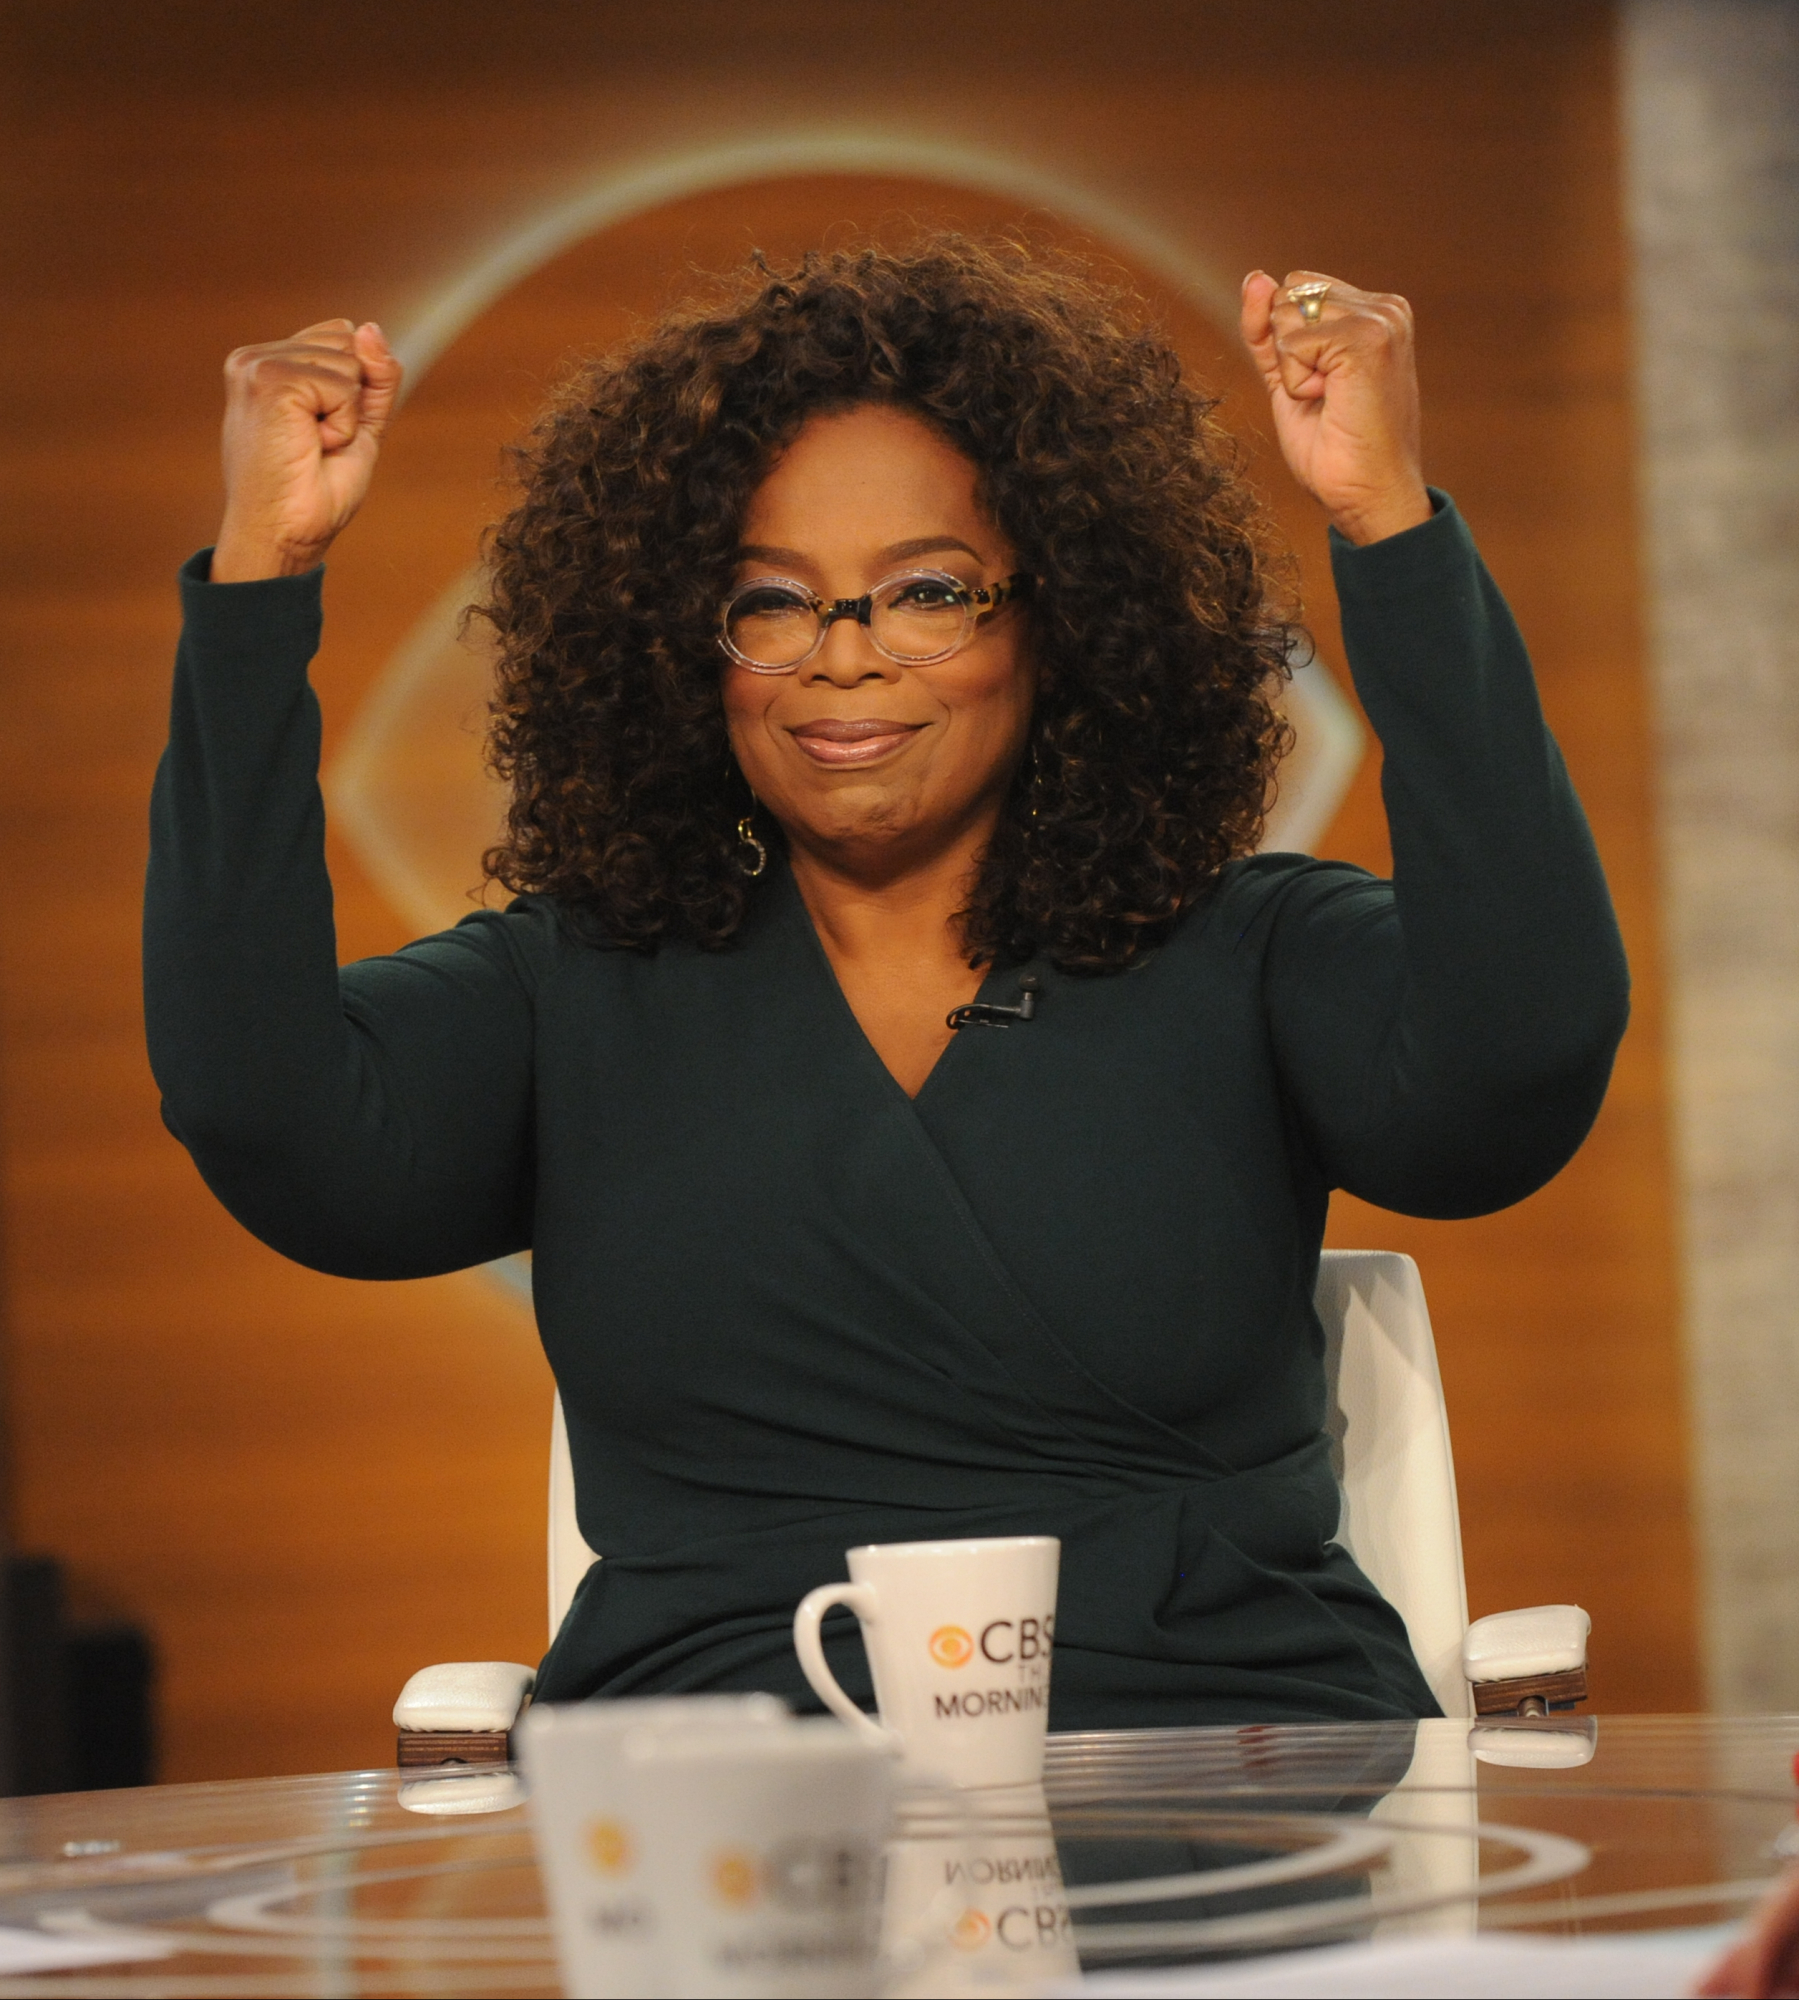 Oprah Winfrey visits CBS This Morning with Co-hosts Norah O'Donnell and Gayle King on Wednesday, Oct. 14, 2015. (Heather Wines&mdash;CBS/Getty Images)